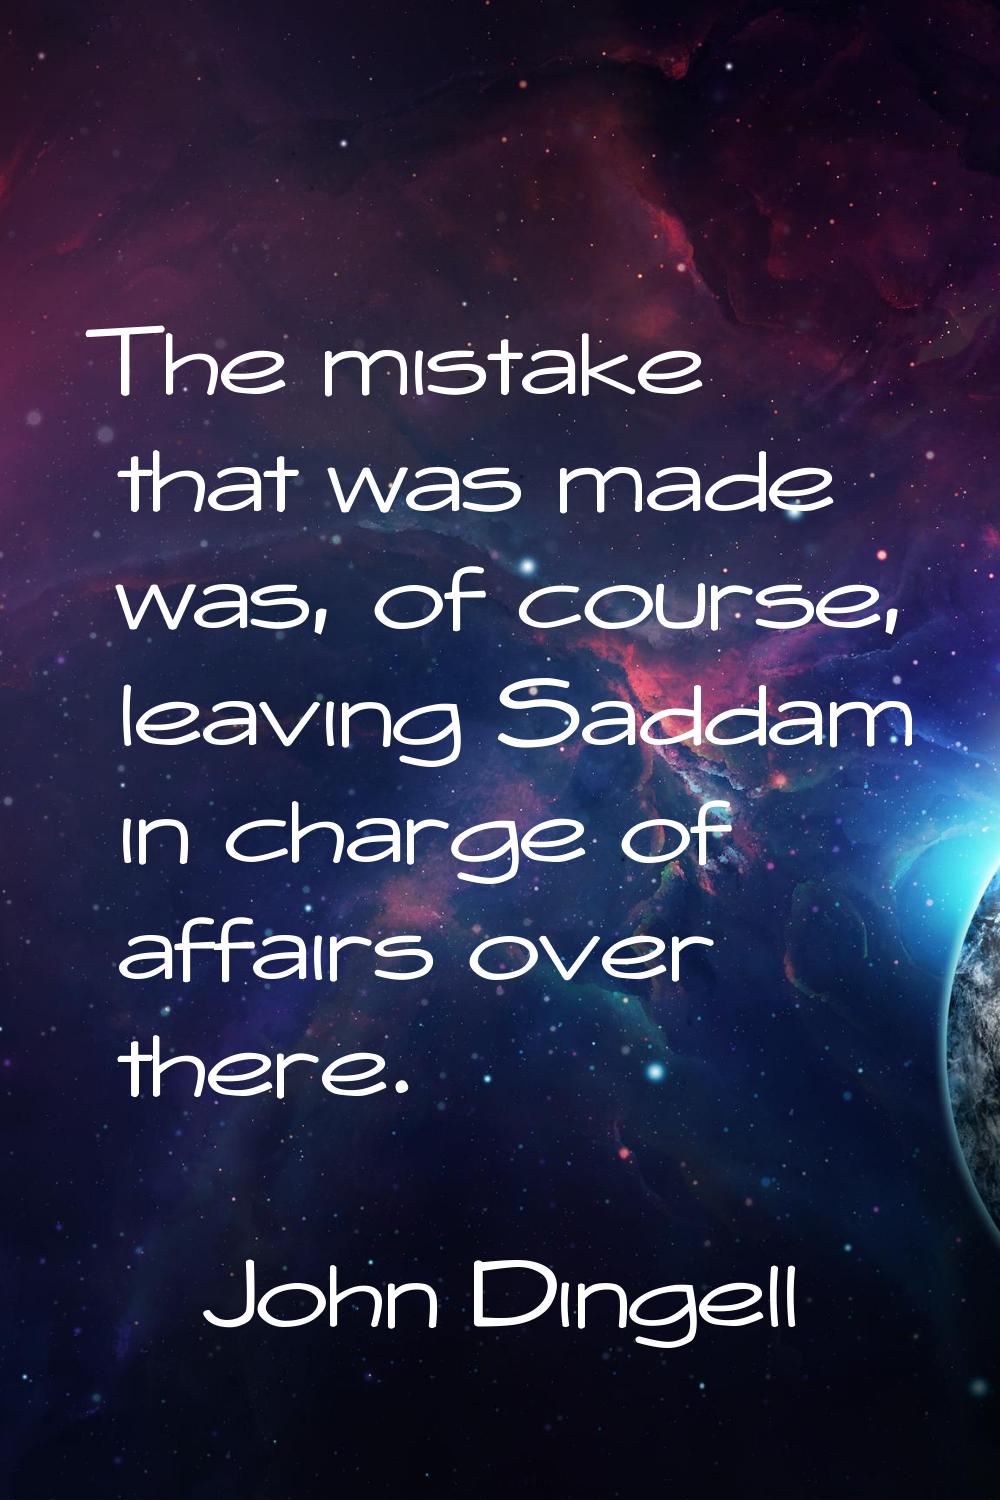 The mistake that was made was, of course, leaving Saddam in charge of affairs over there.